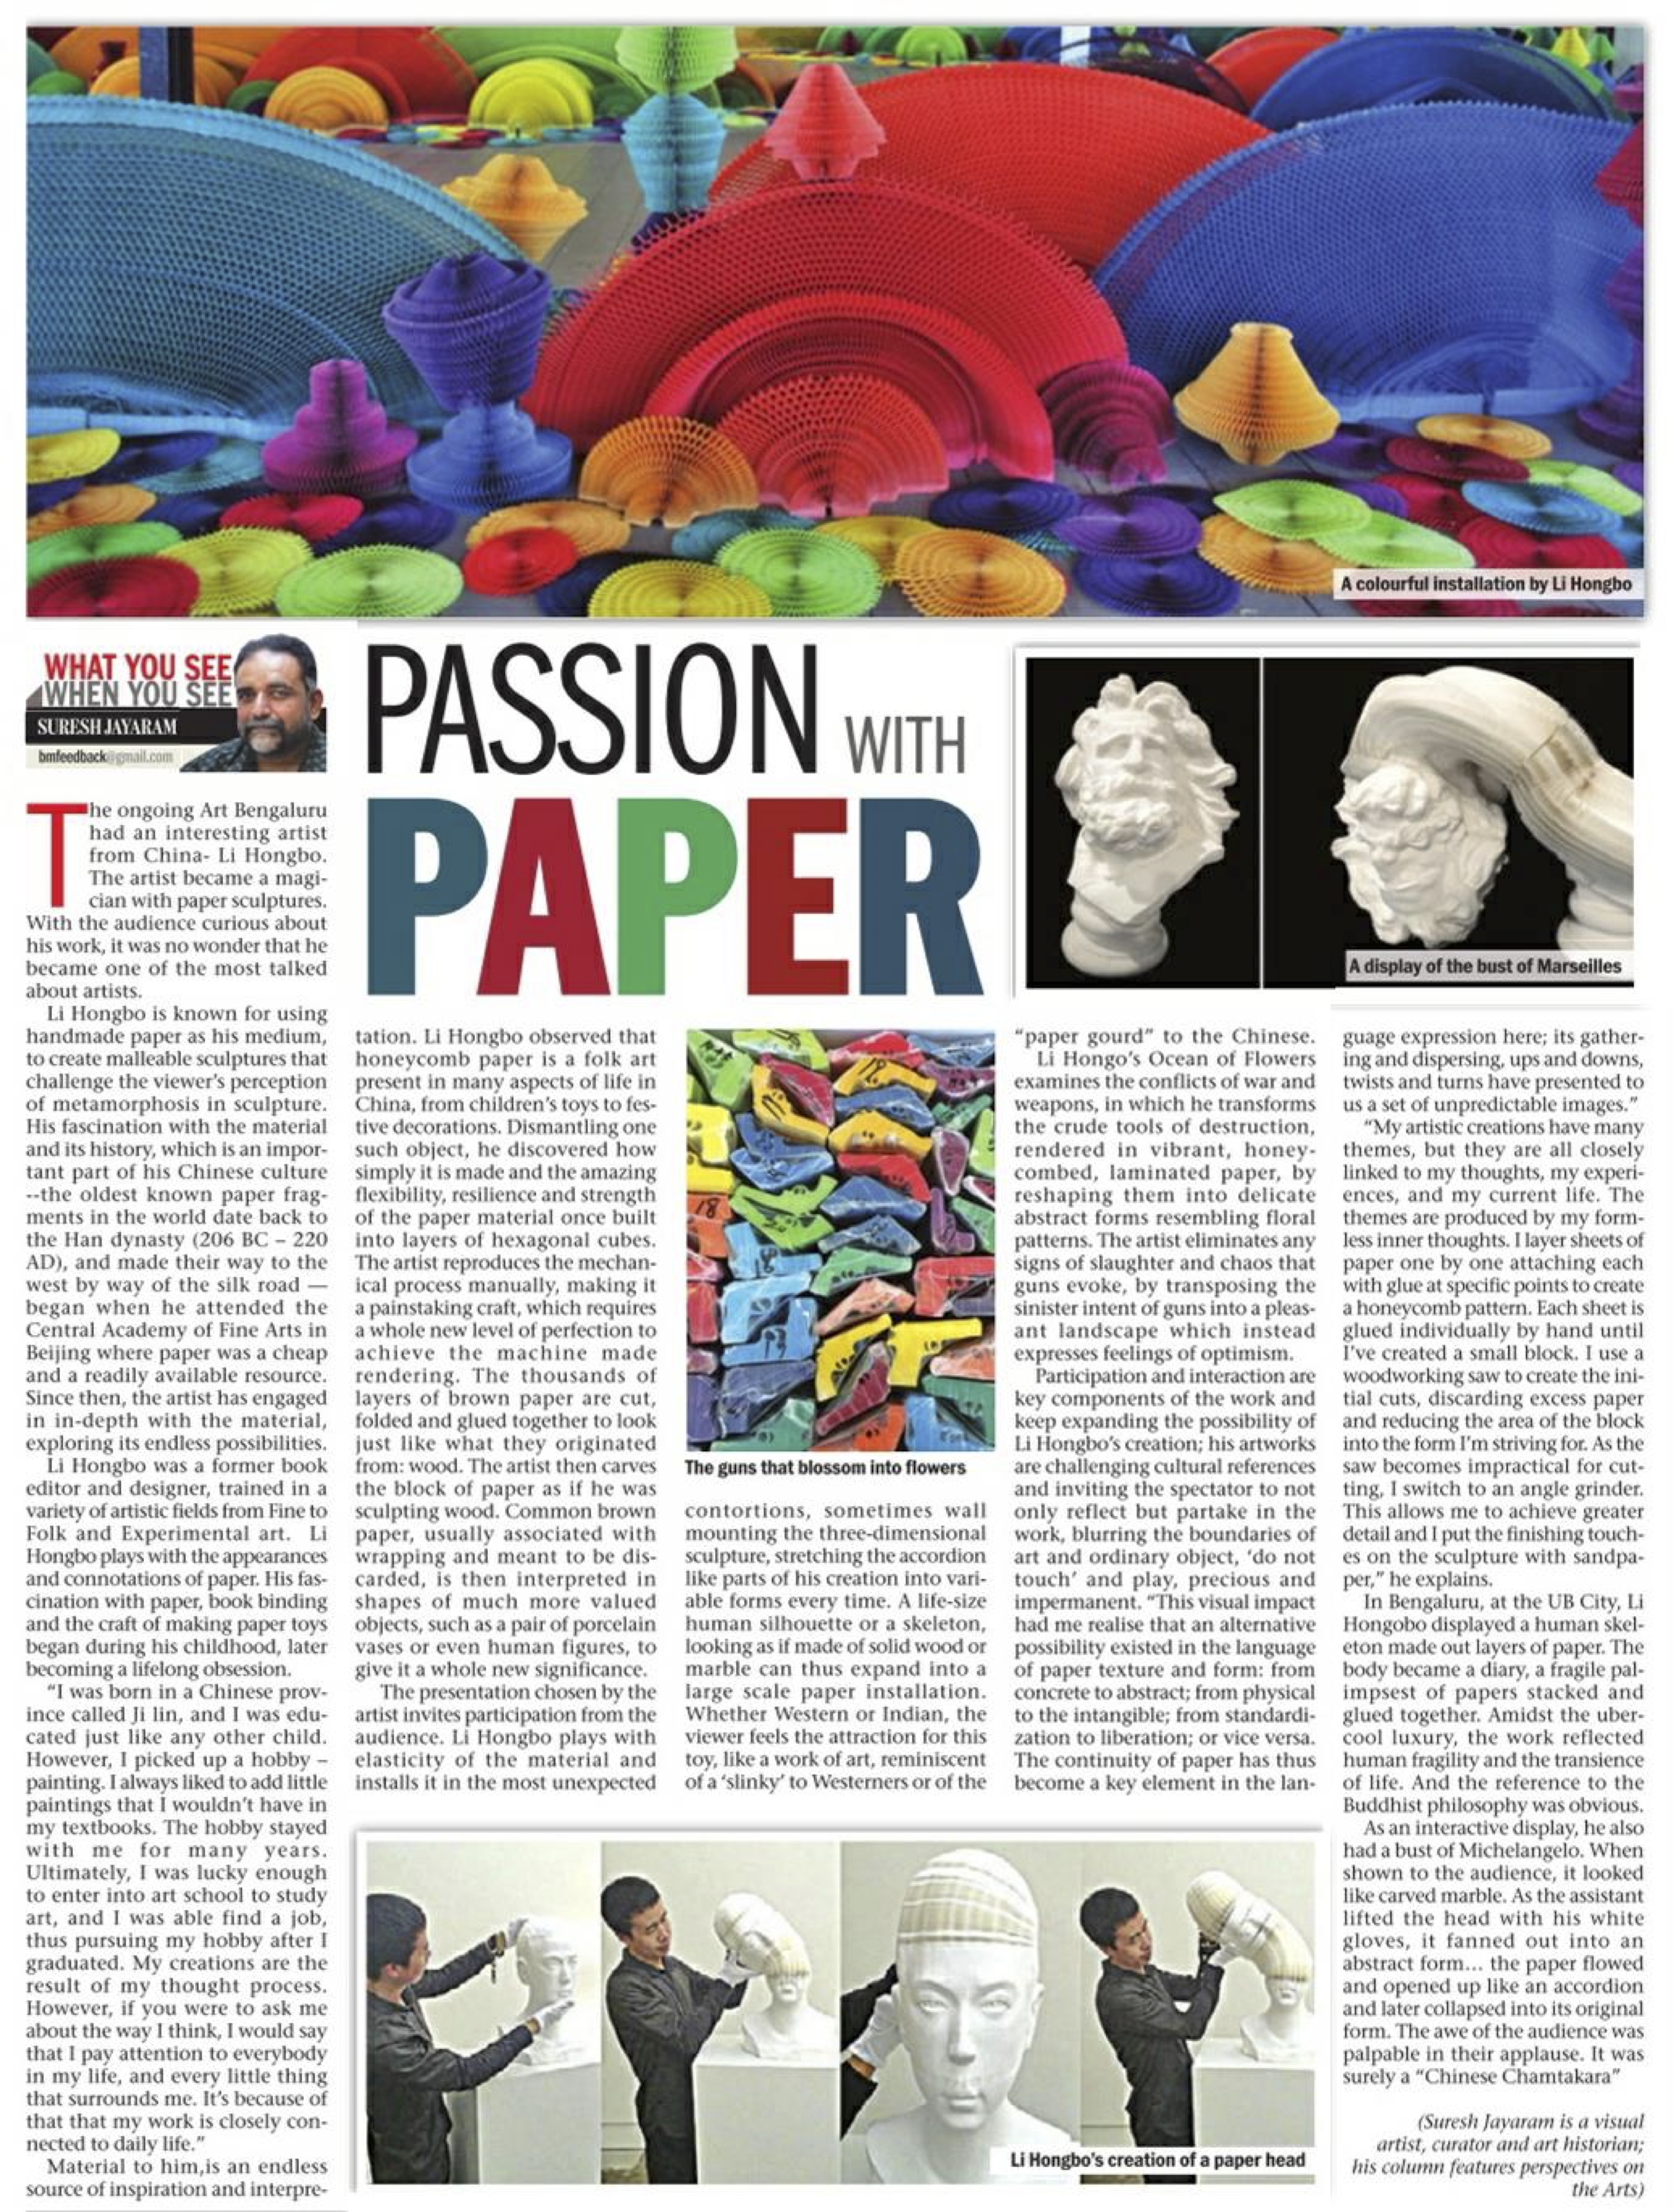 Passion with paper